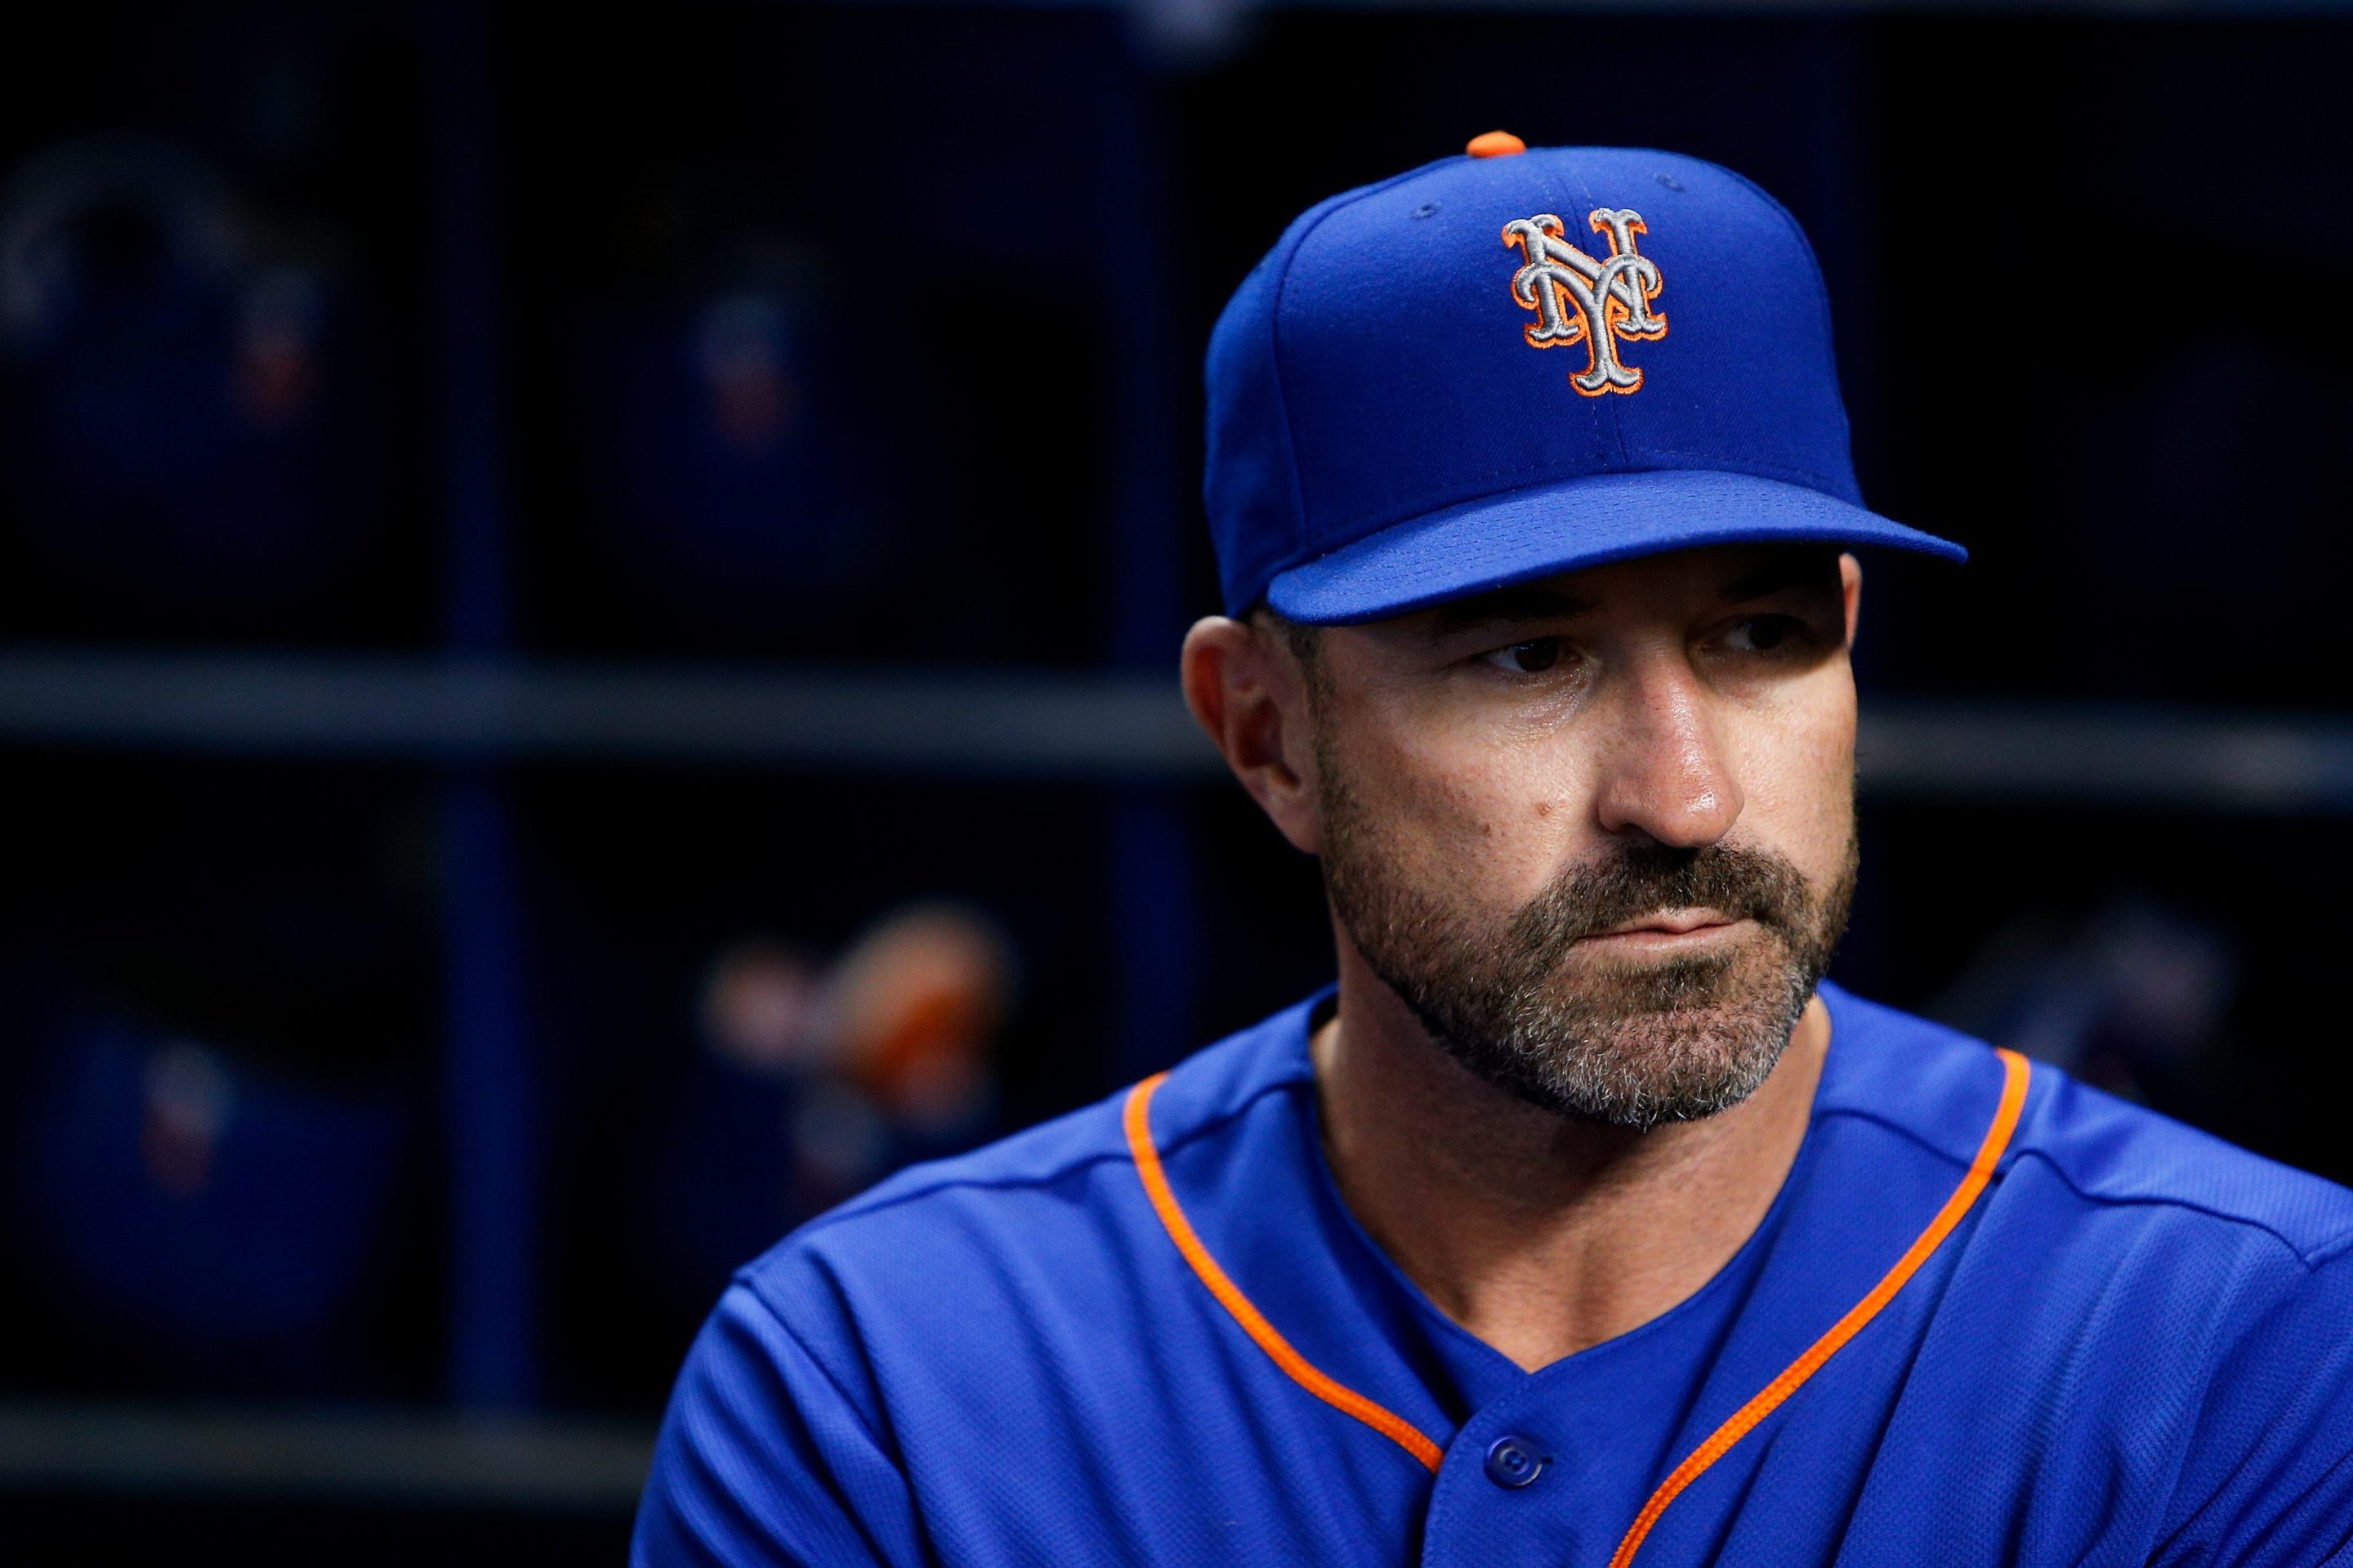 Mickey Callaway during his time as manager of the New York Mets